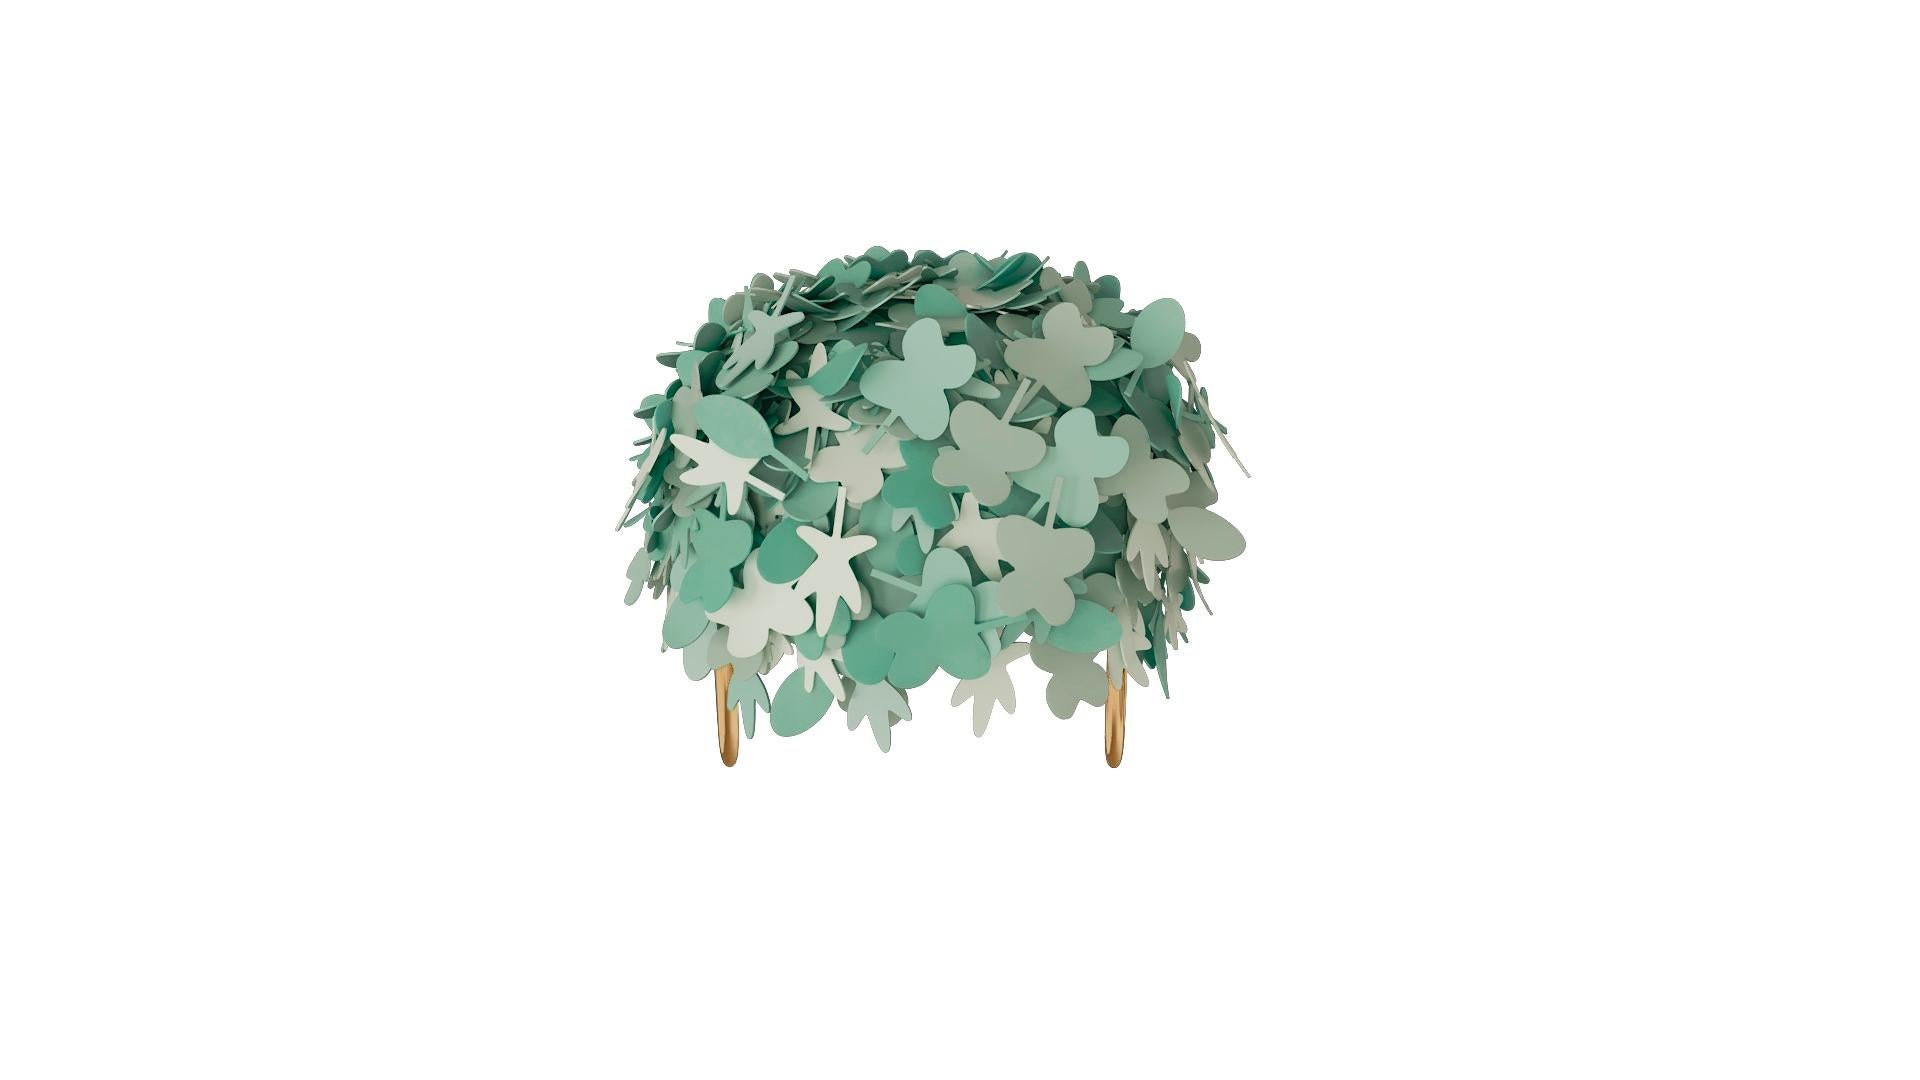 The comfortable Leaf Pouf with rich green leather and brass legs by Marcantonio, is a playful pile of leaves in shades of rich green leather, with slick brass legs.

For his debut creations, Marcantonio introduced “Vegetal Animal”, a concept that